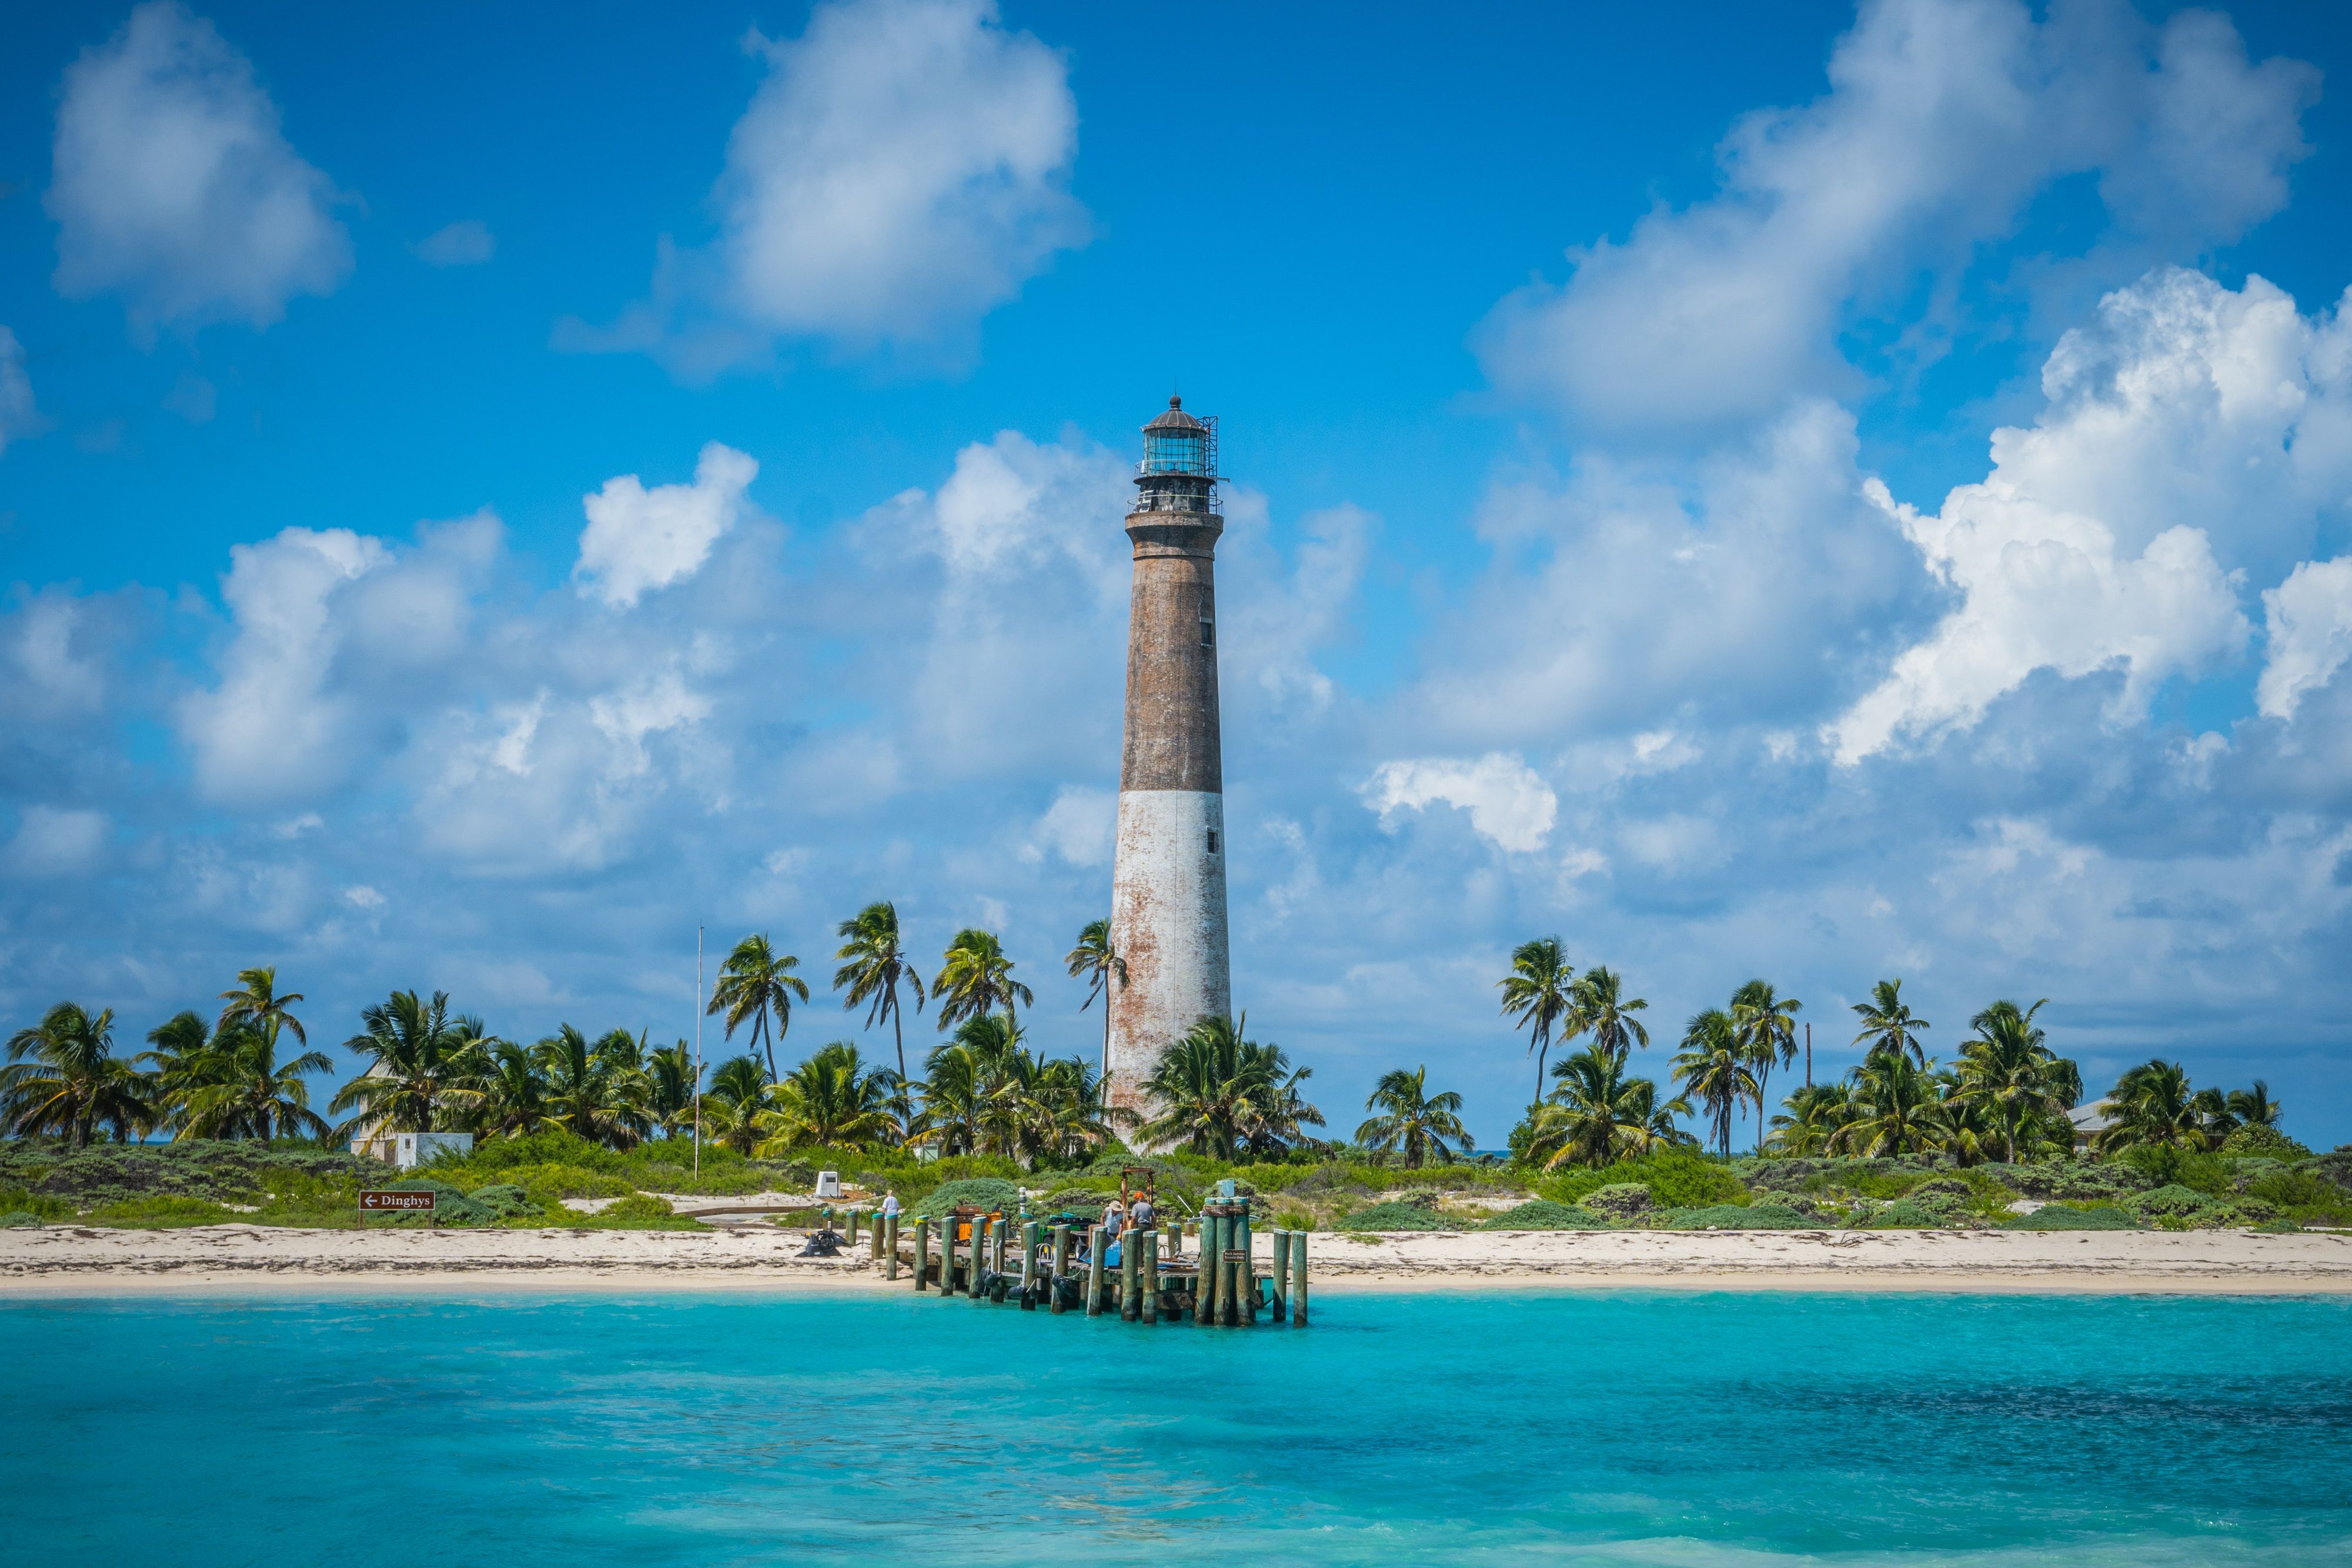 A white sandy shore separating a water body and an island with a lighthouse surrounded by trees in Dry Tortugas National Park